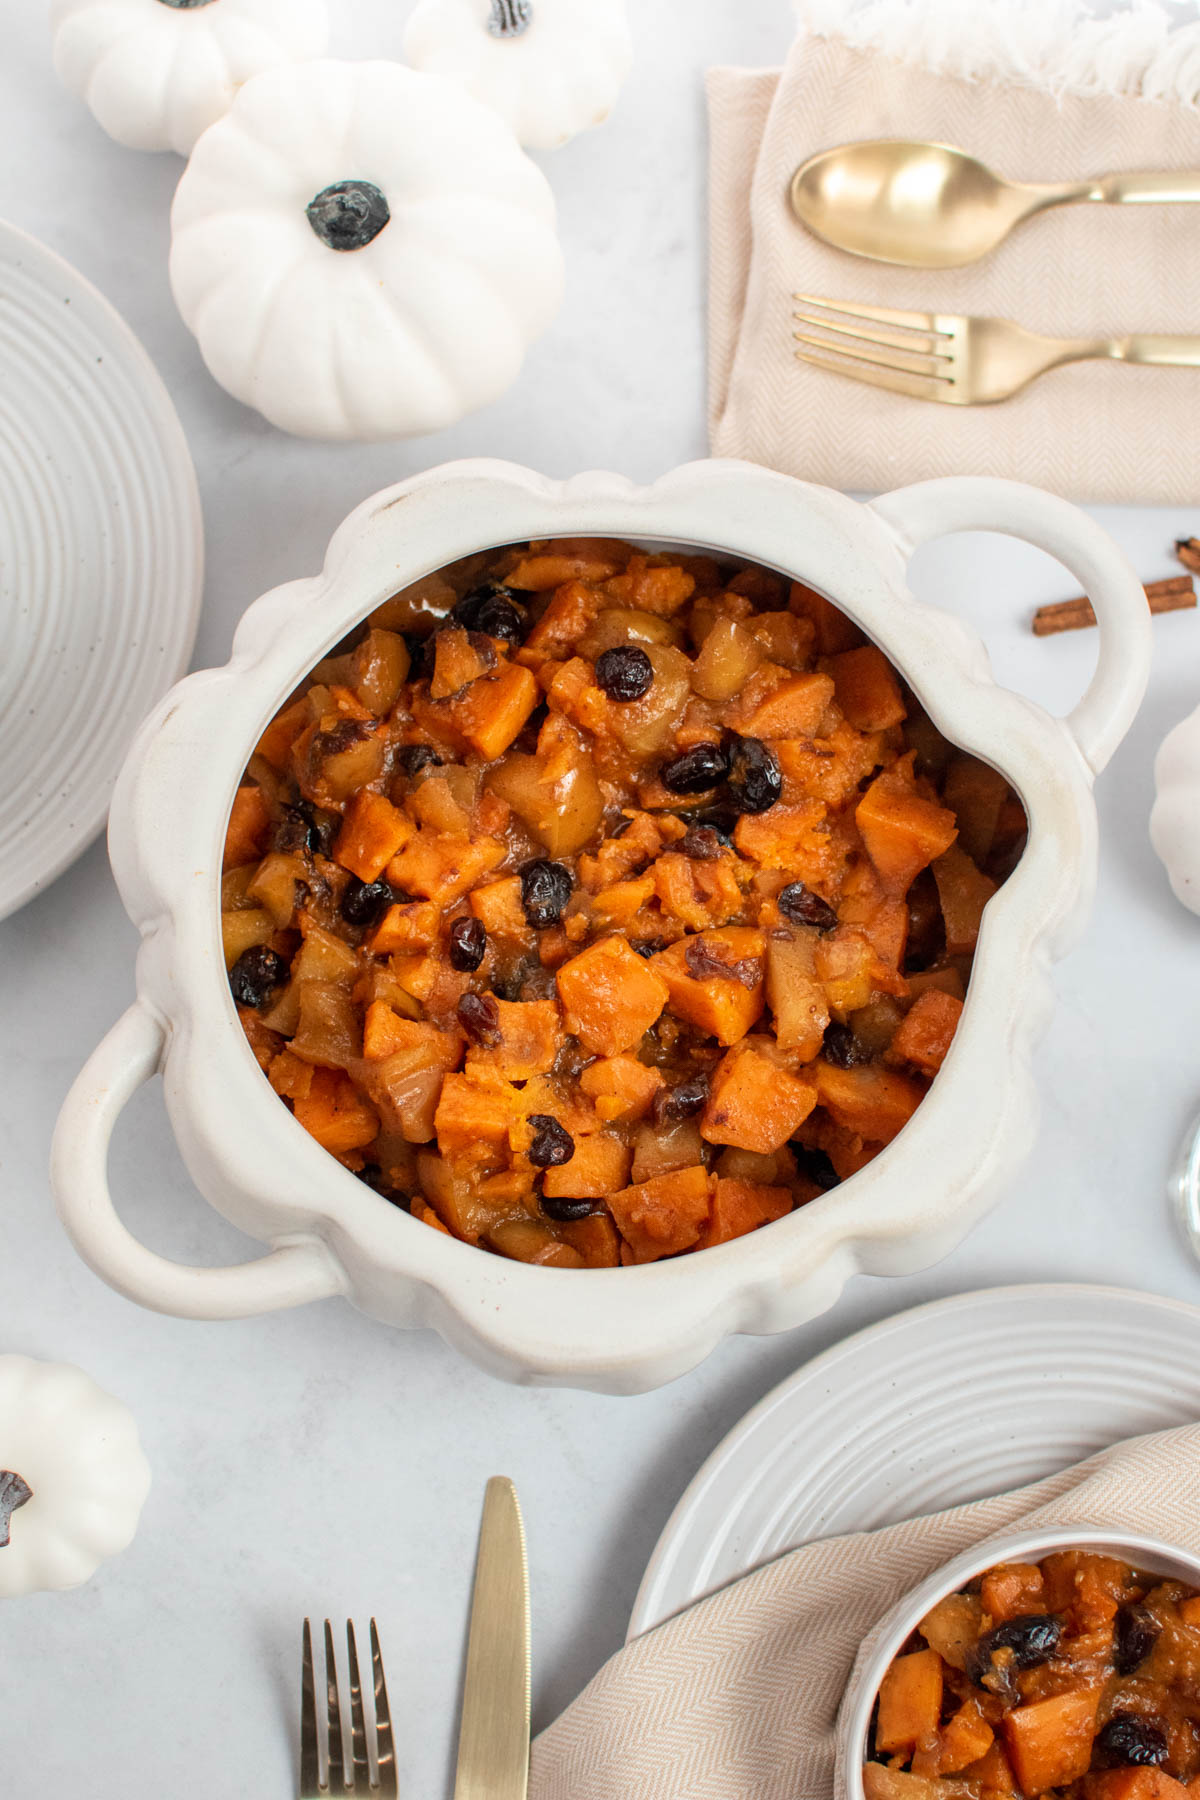 Slow cooker sweet potatoes in white pumpkin dish on table with place settings and white pumpkins.